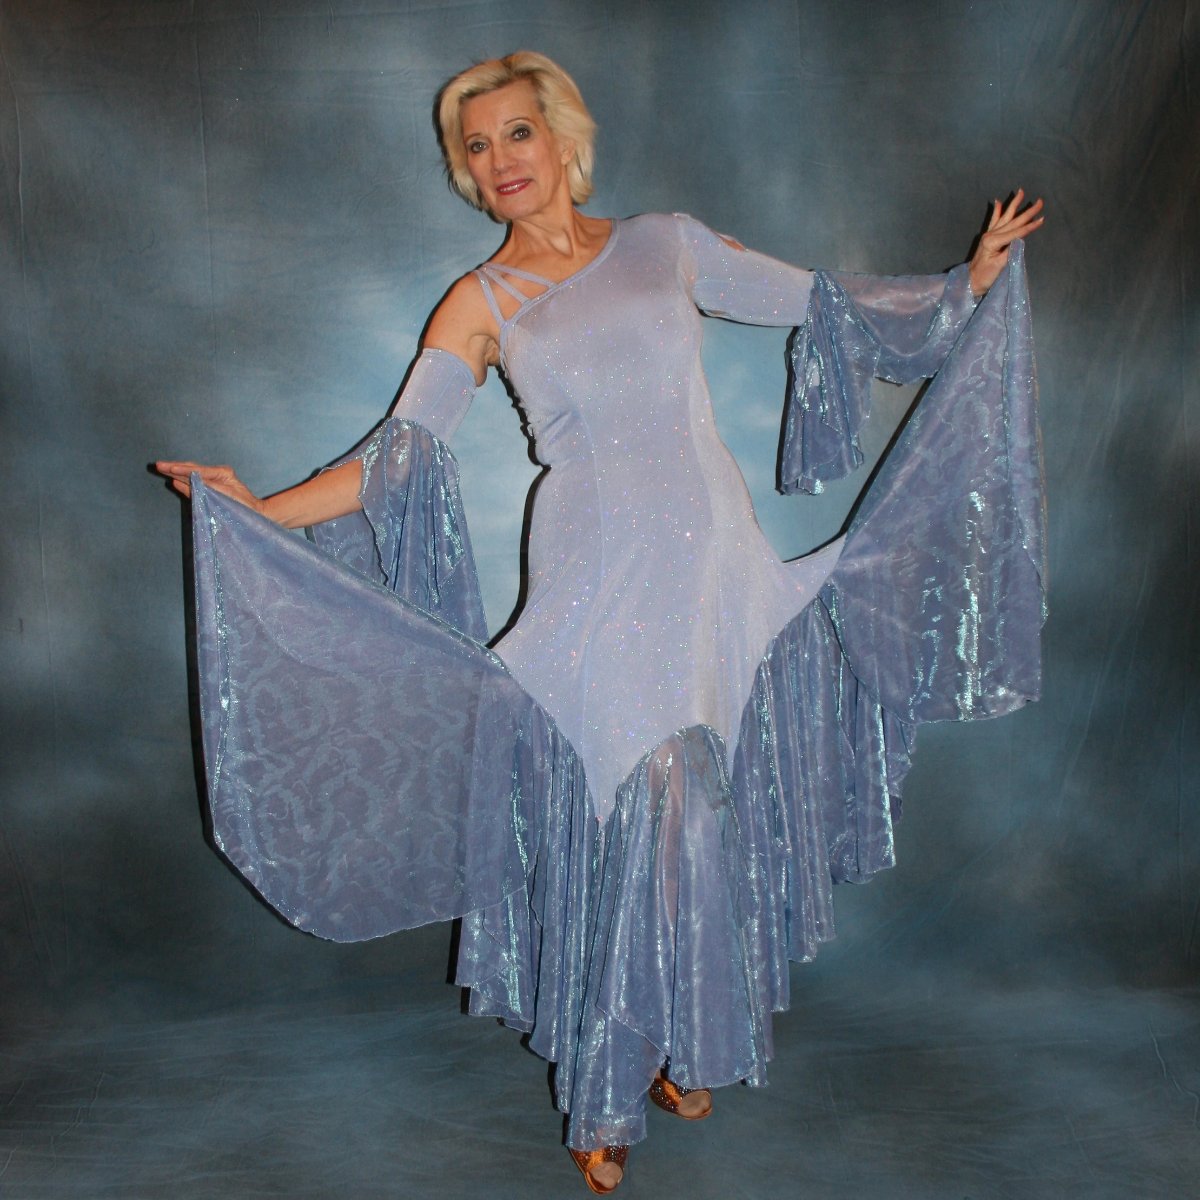 Crystal's Creations Periwinkle ballroom dress of glitter slinky with periwinkle iridescent sheer large skirt flounces with a subtle texture, one long sleeve, one arm embellishment with flounces & back detail straps… 